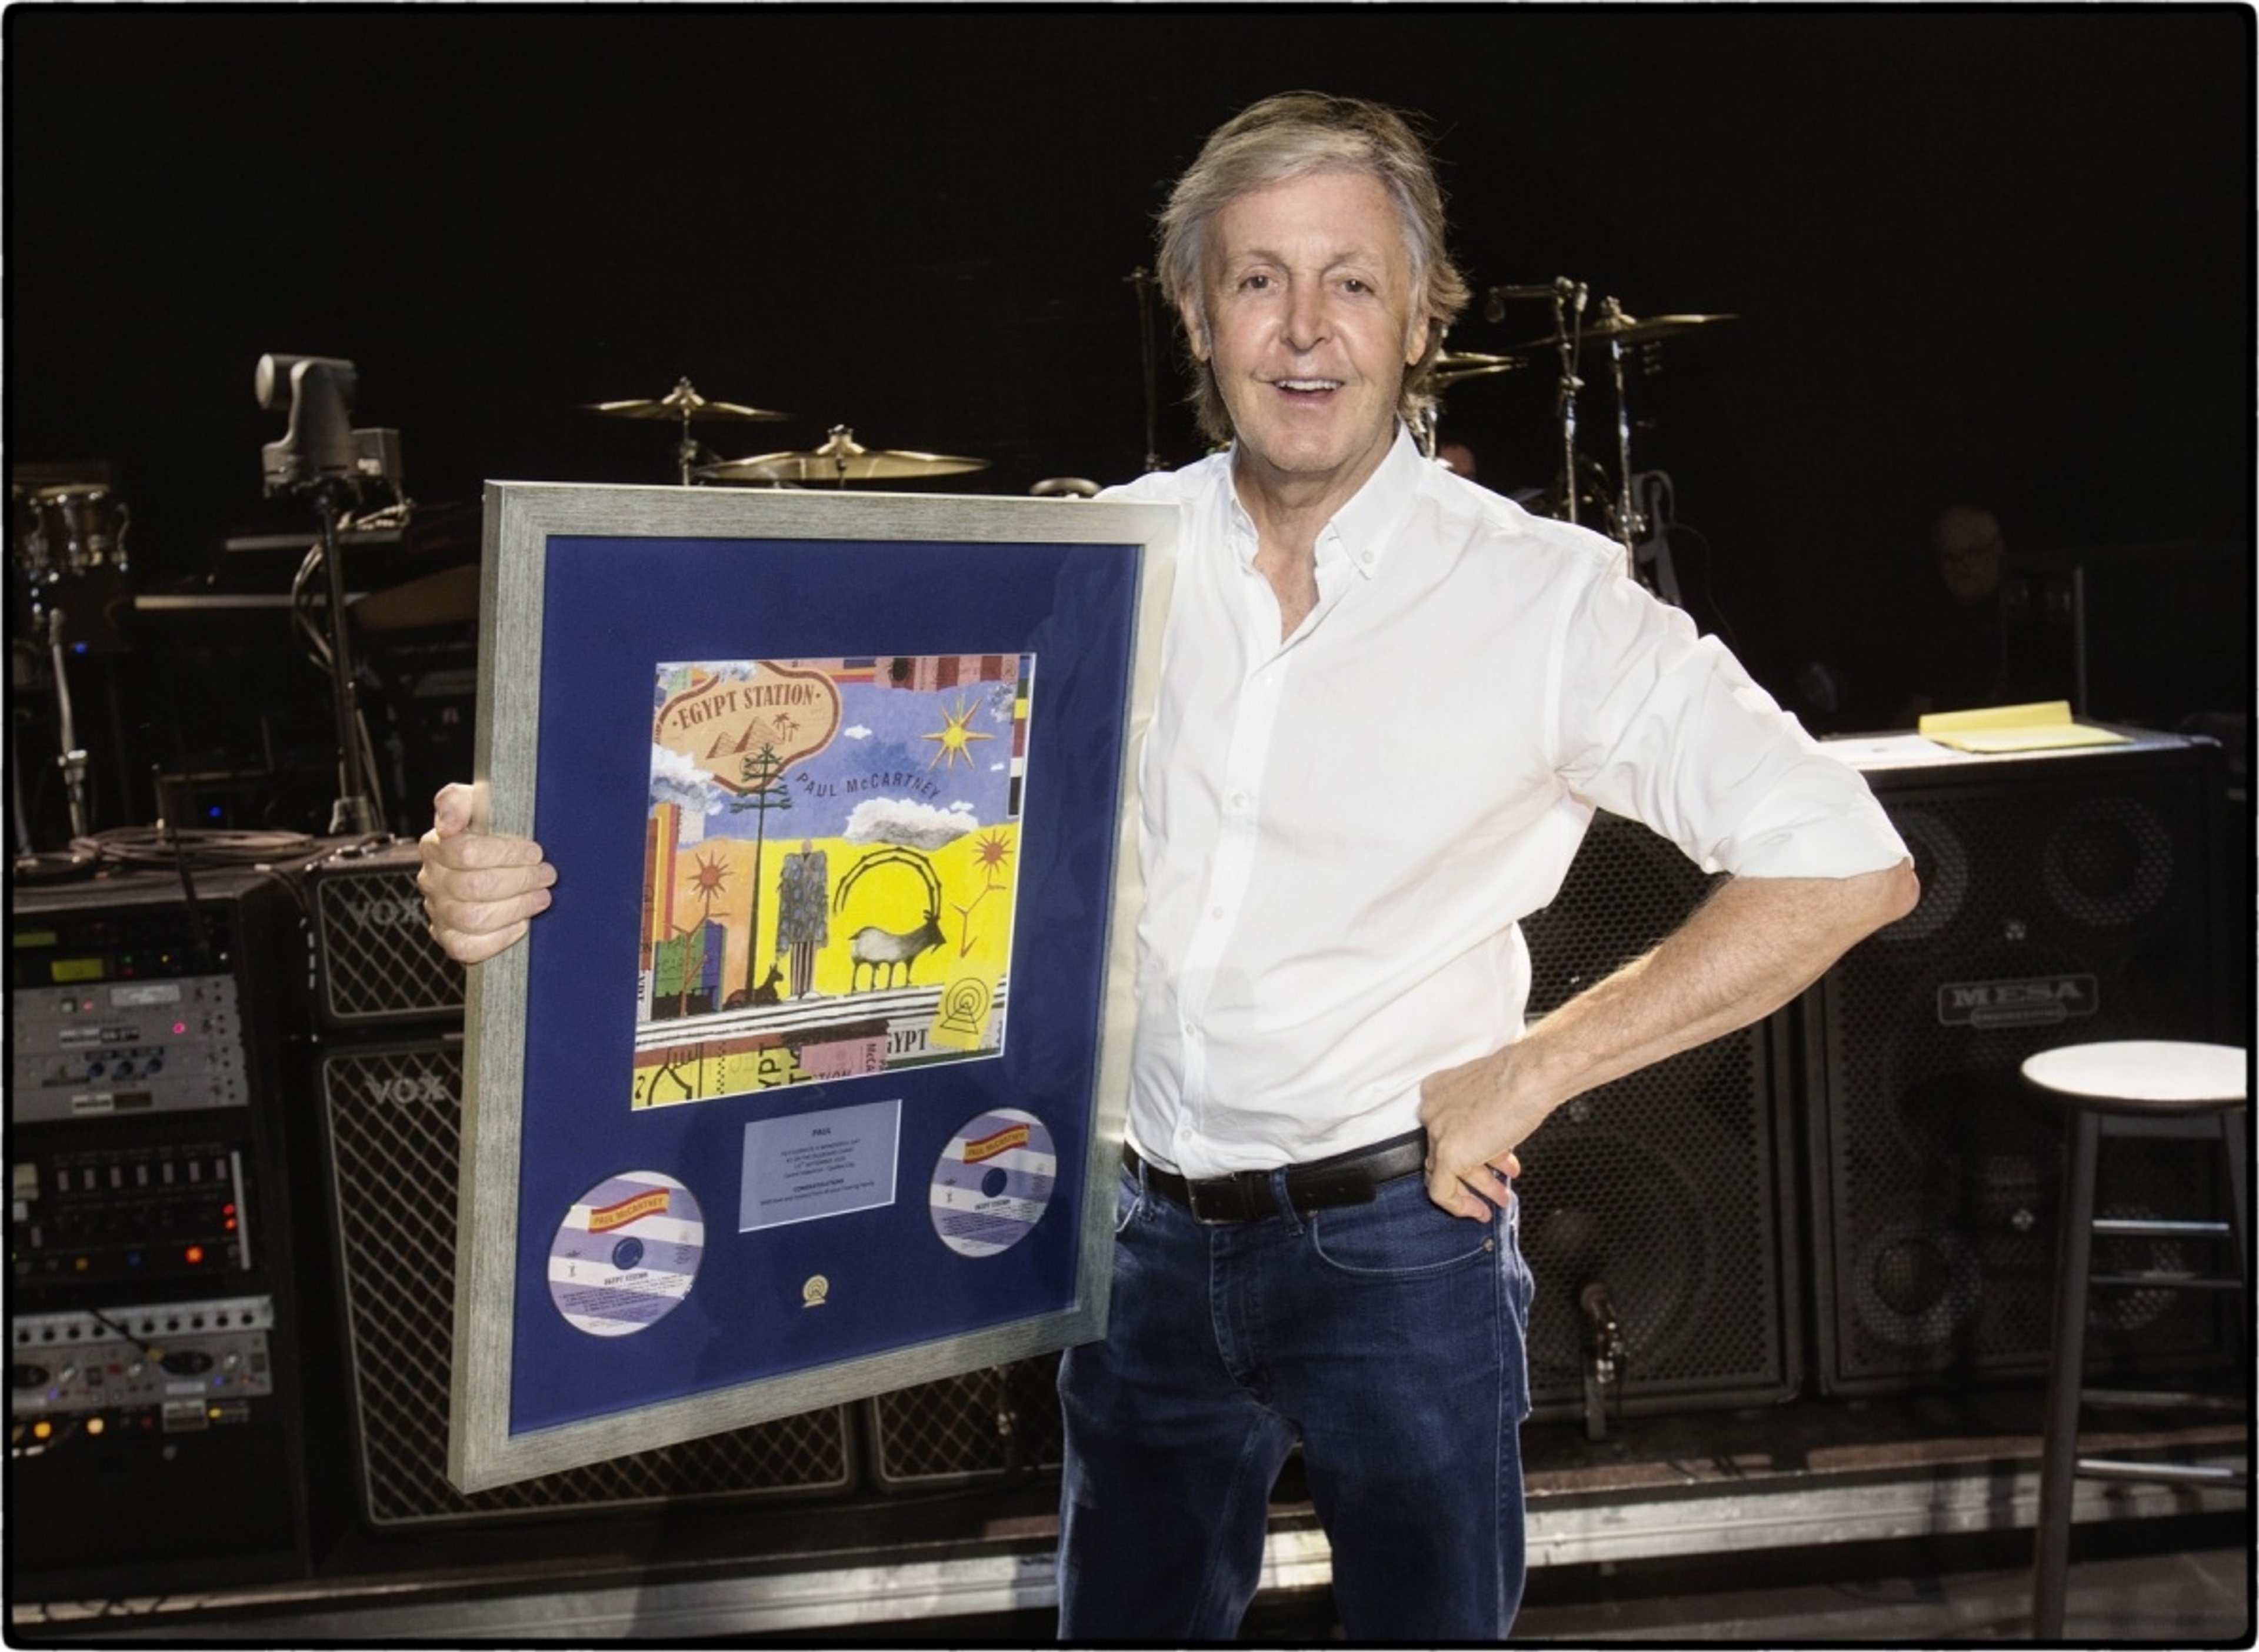 Paul was thrilled to learn that 'Egypt Station' charted at number 1 in the USA. September 2018. 